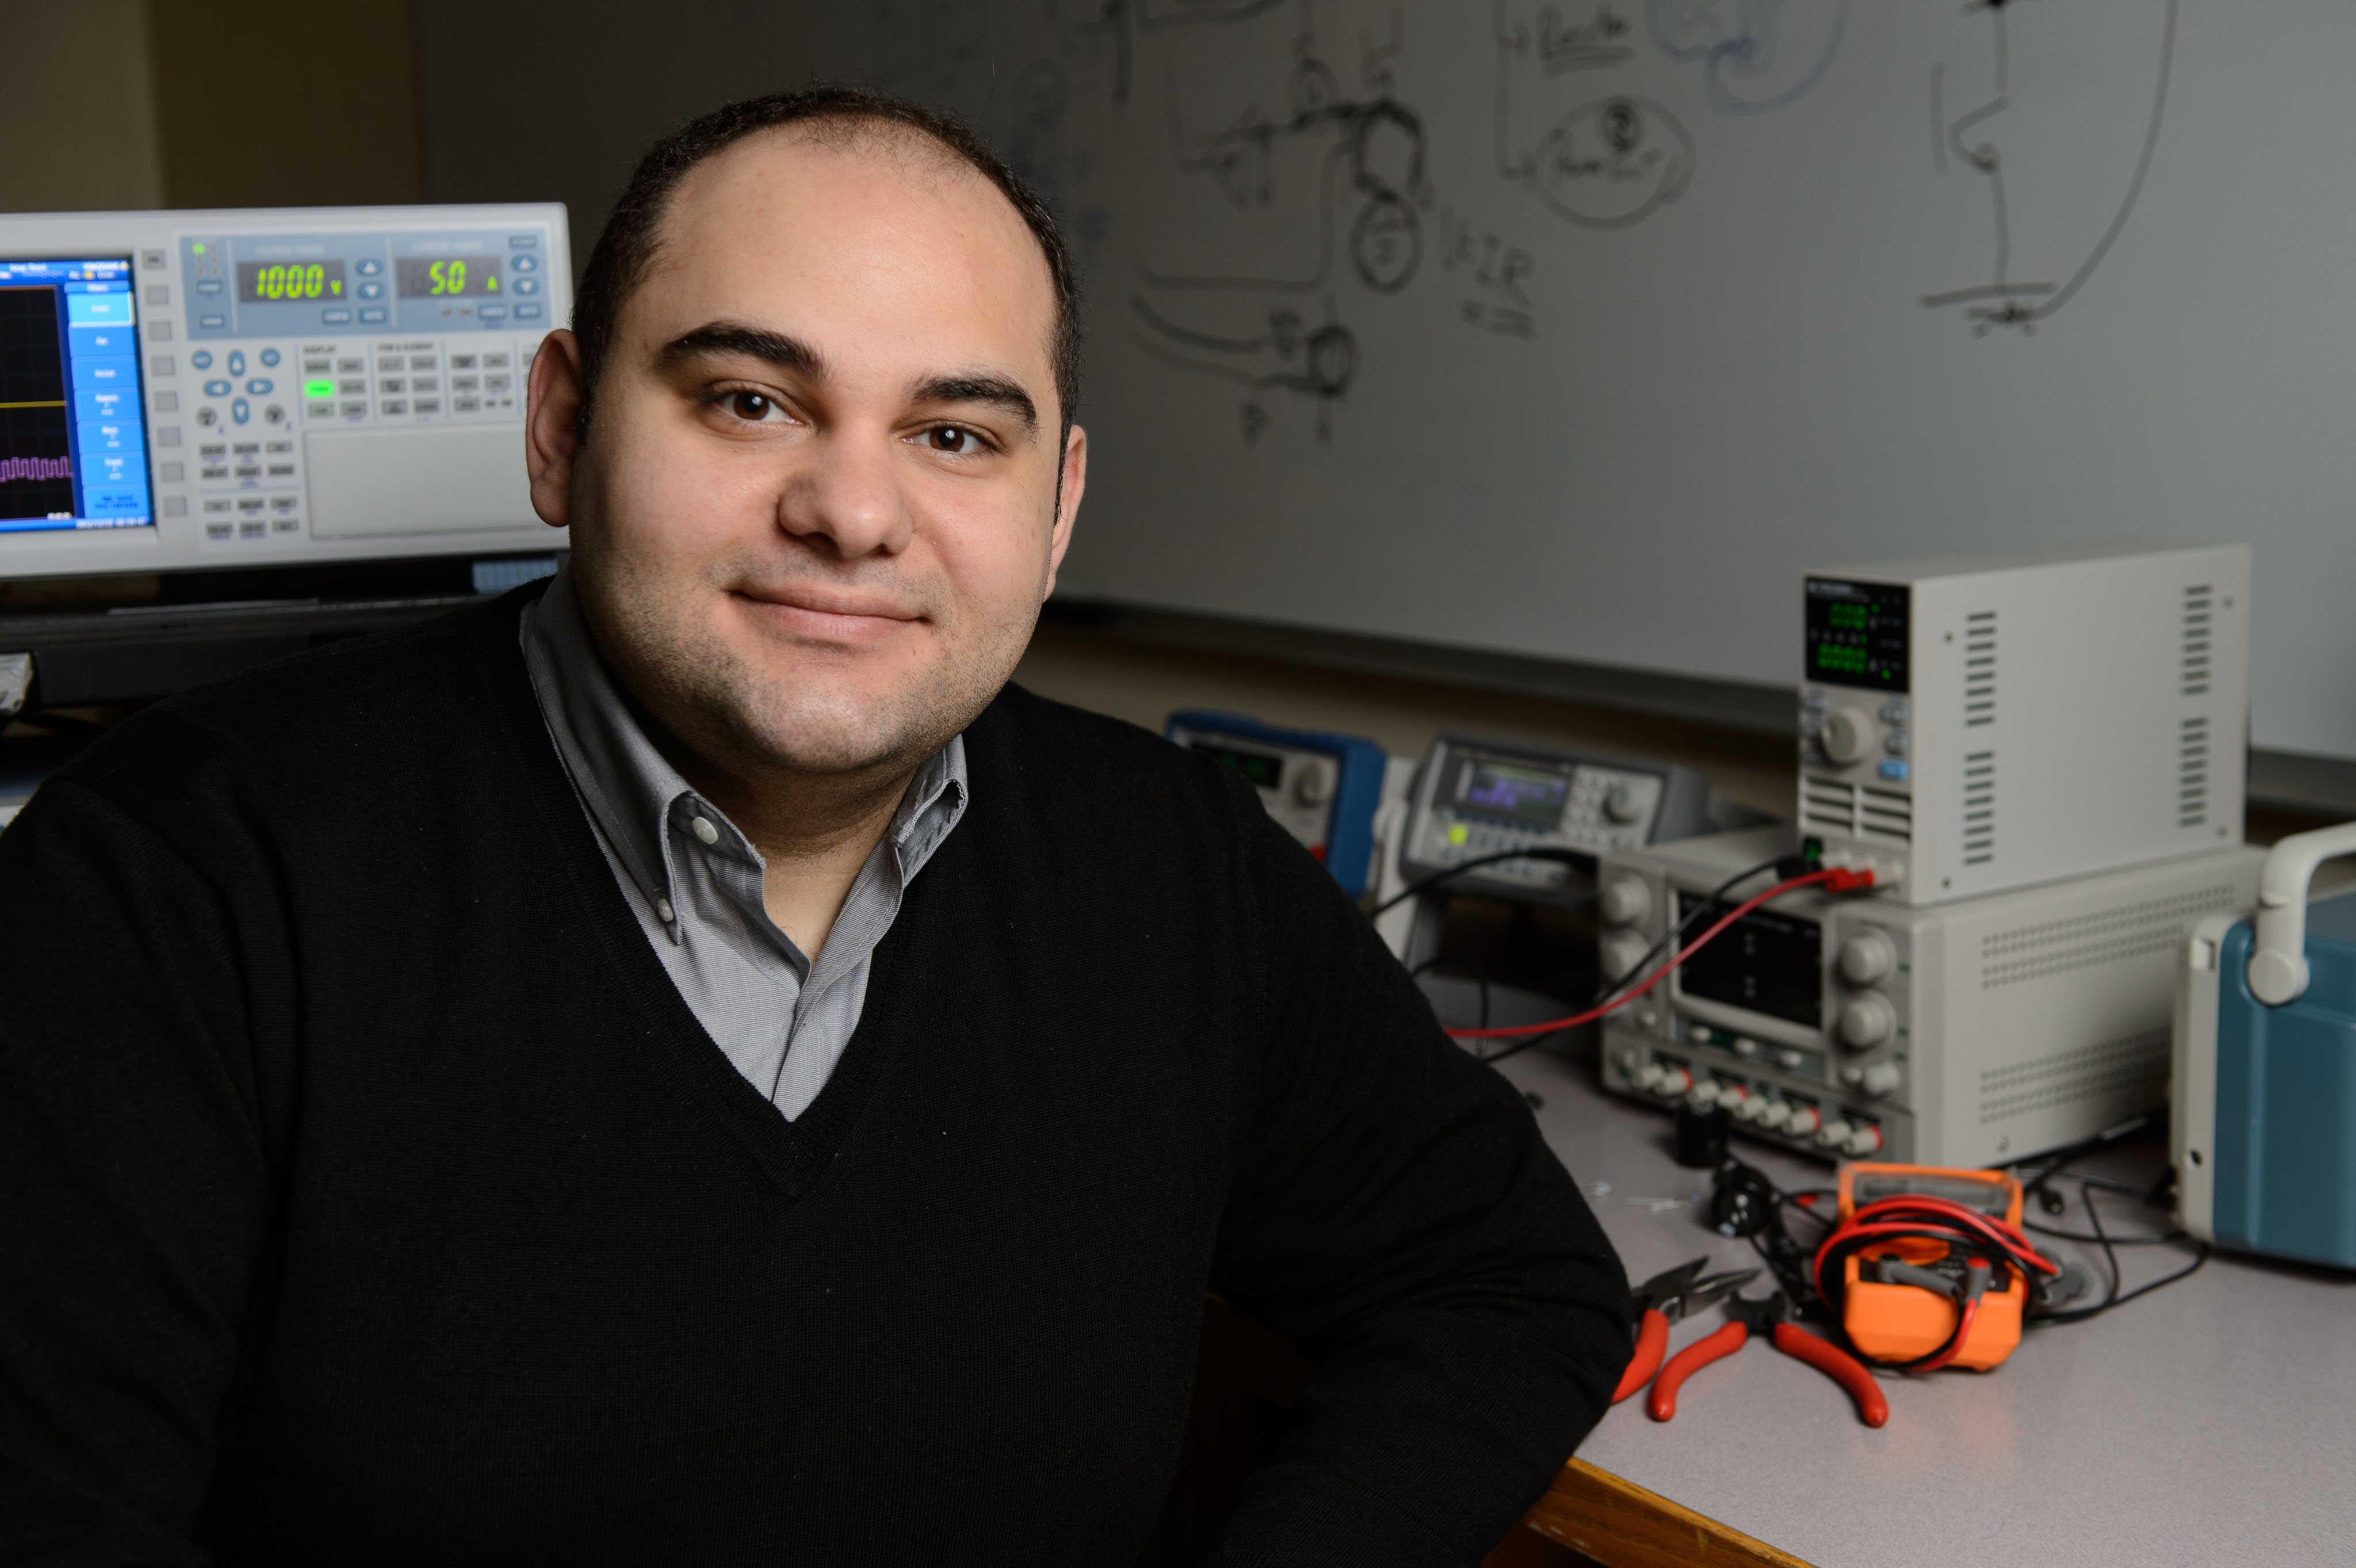 Ali Bazzi, assistant professor of electrical and computer engineering at his lab on Dec. 21, 2012. (Peter Morenus/UConn Photo)